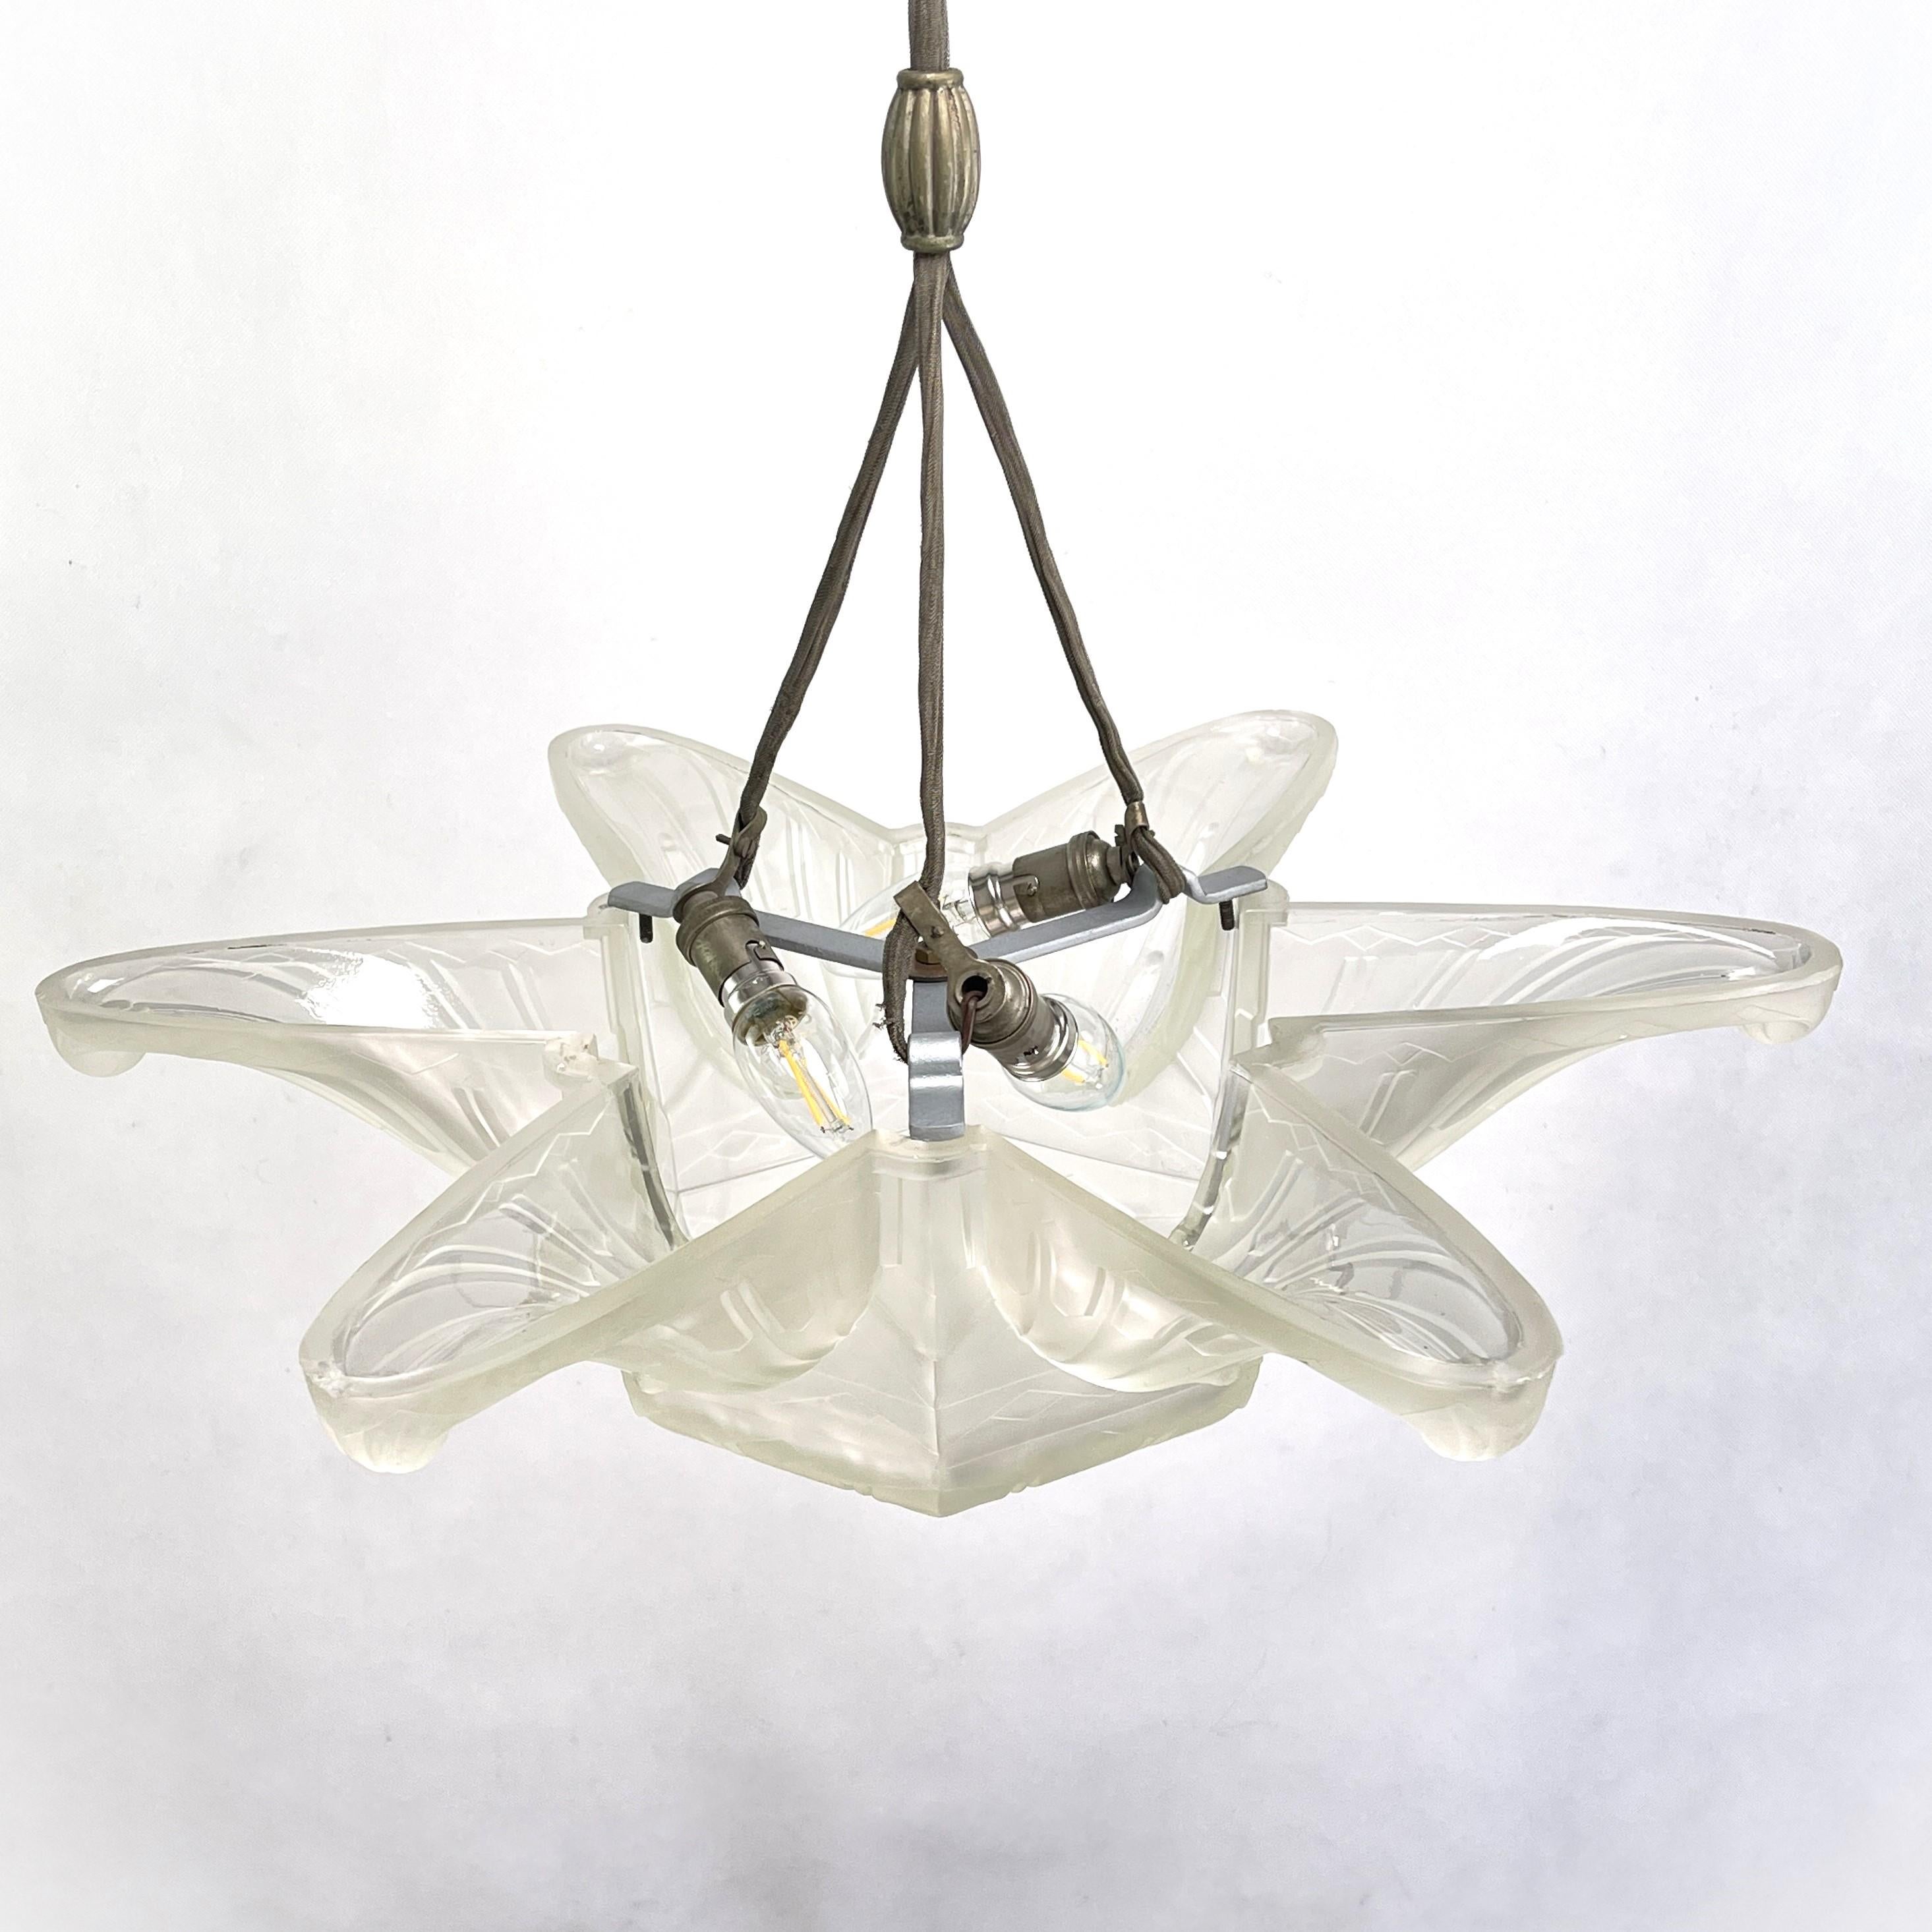 Early 20th Century Impressive Art Deco Chandelier by Hettier & Vincent For Sale